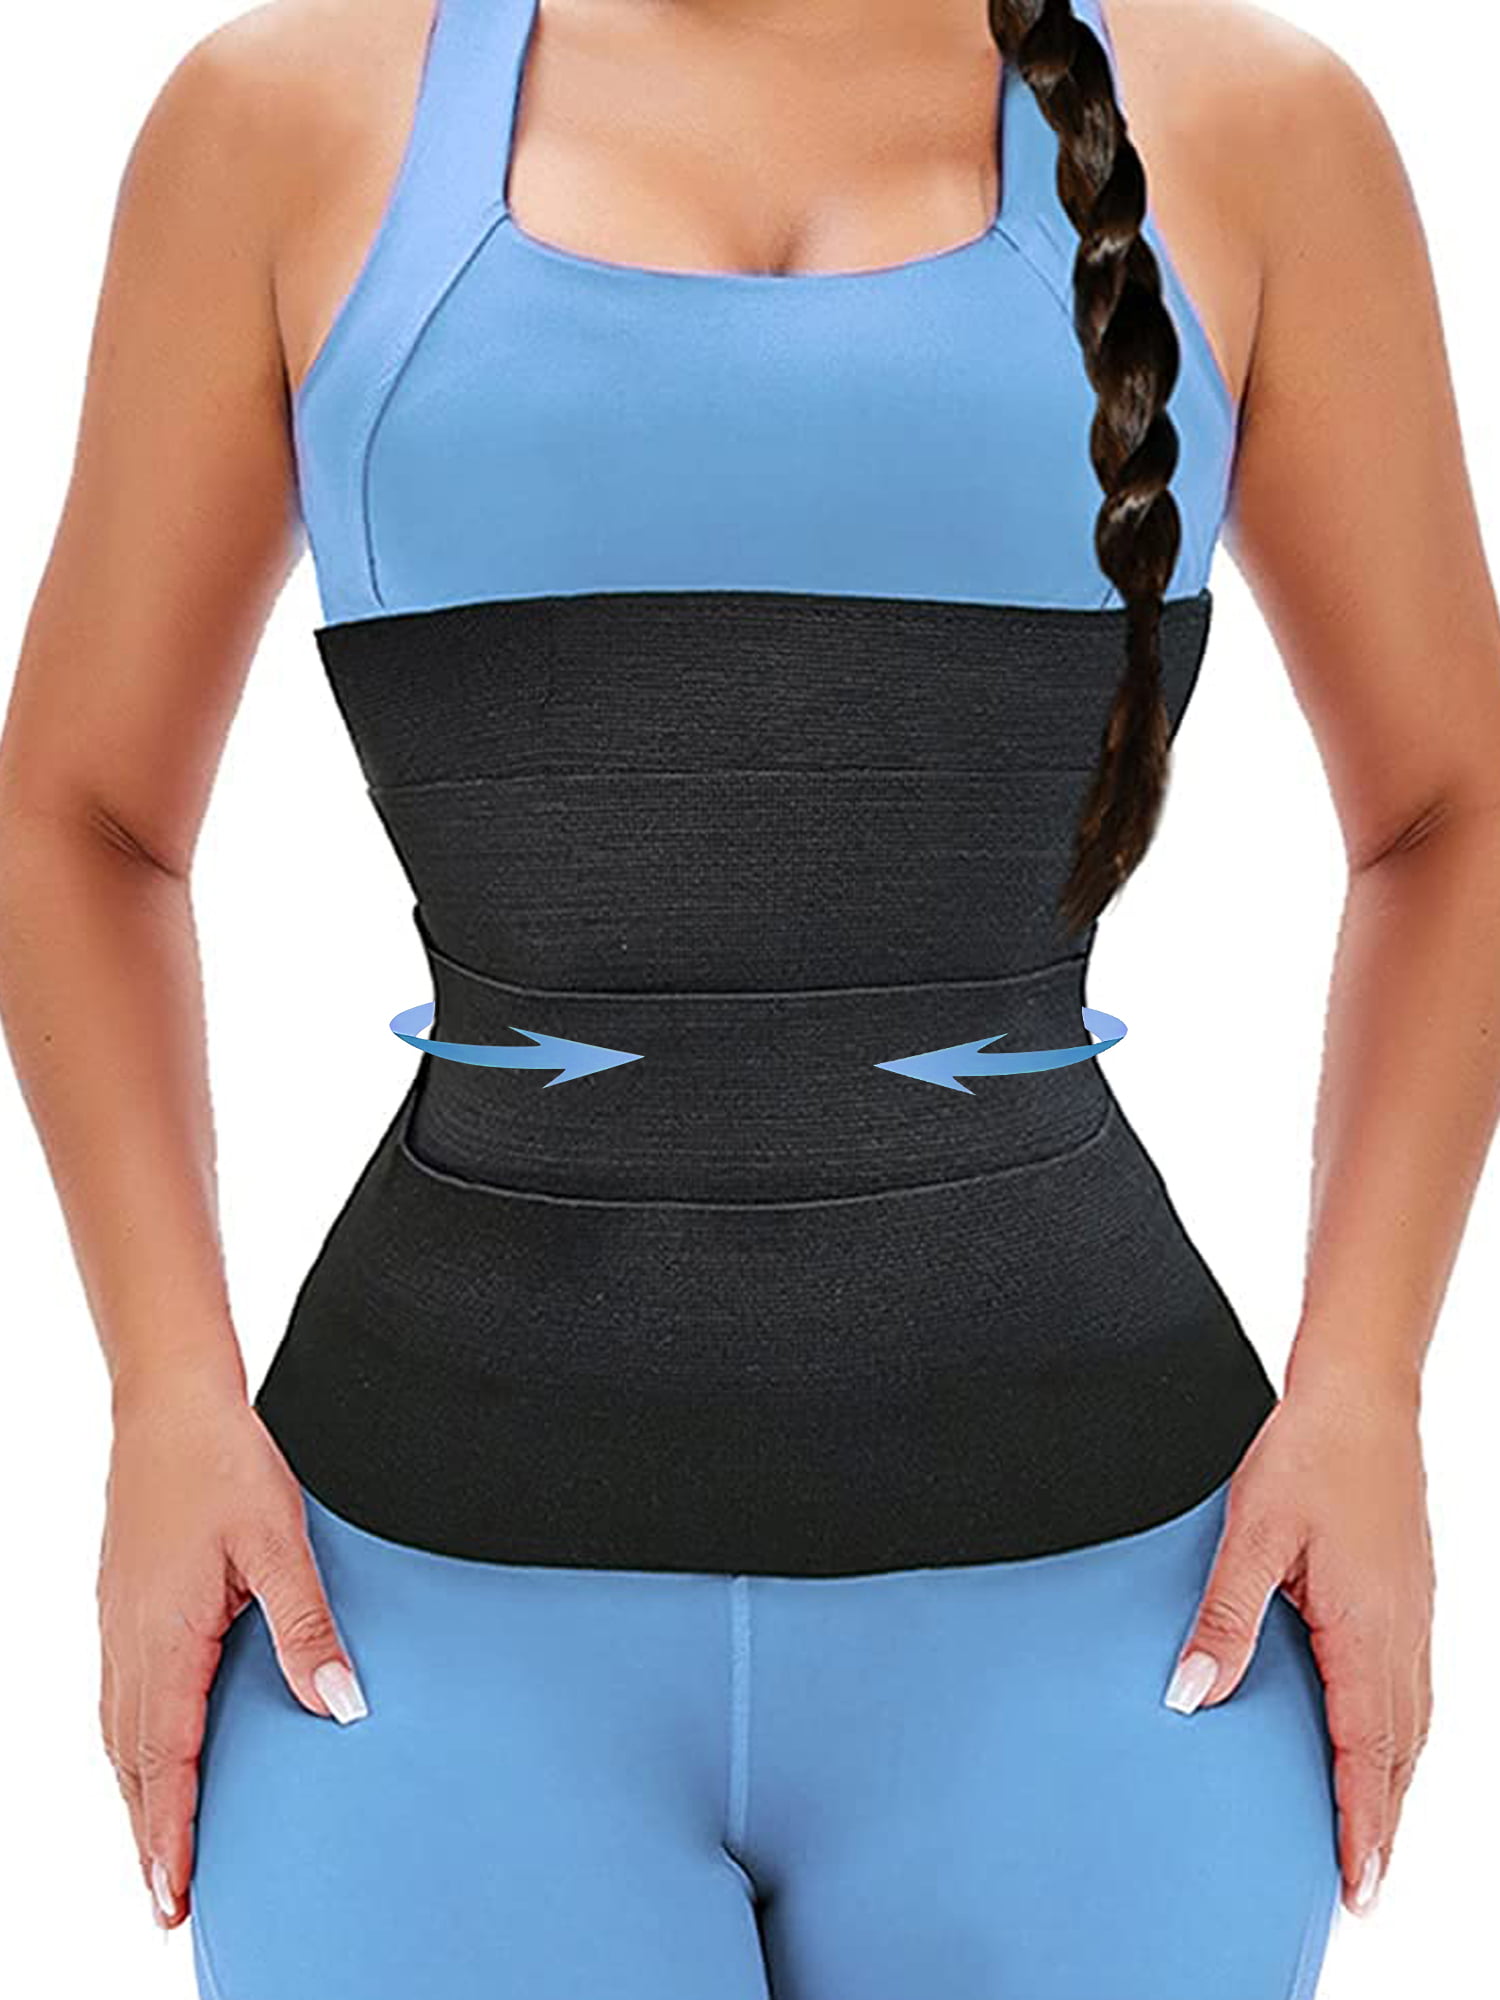 Invisible Wrap No Waist Allowed Body Wrap Women Slimming Back Support Belt Fajas 